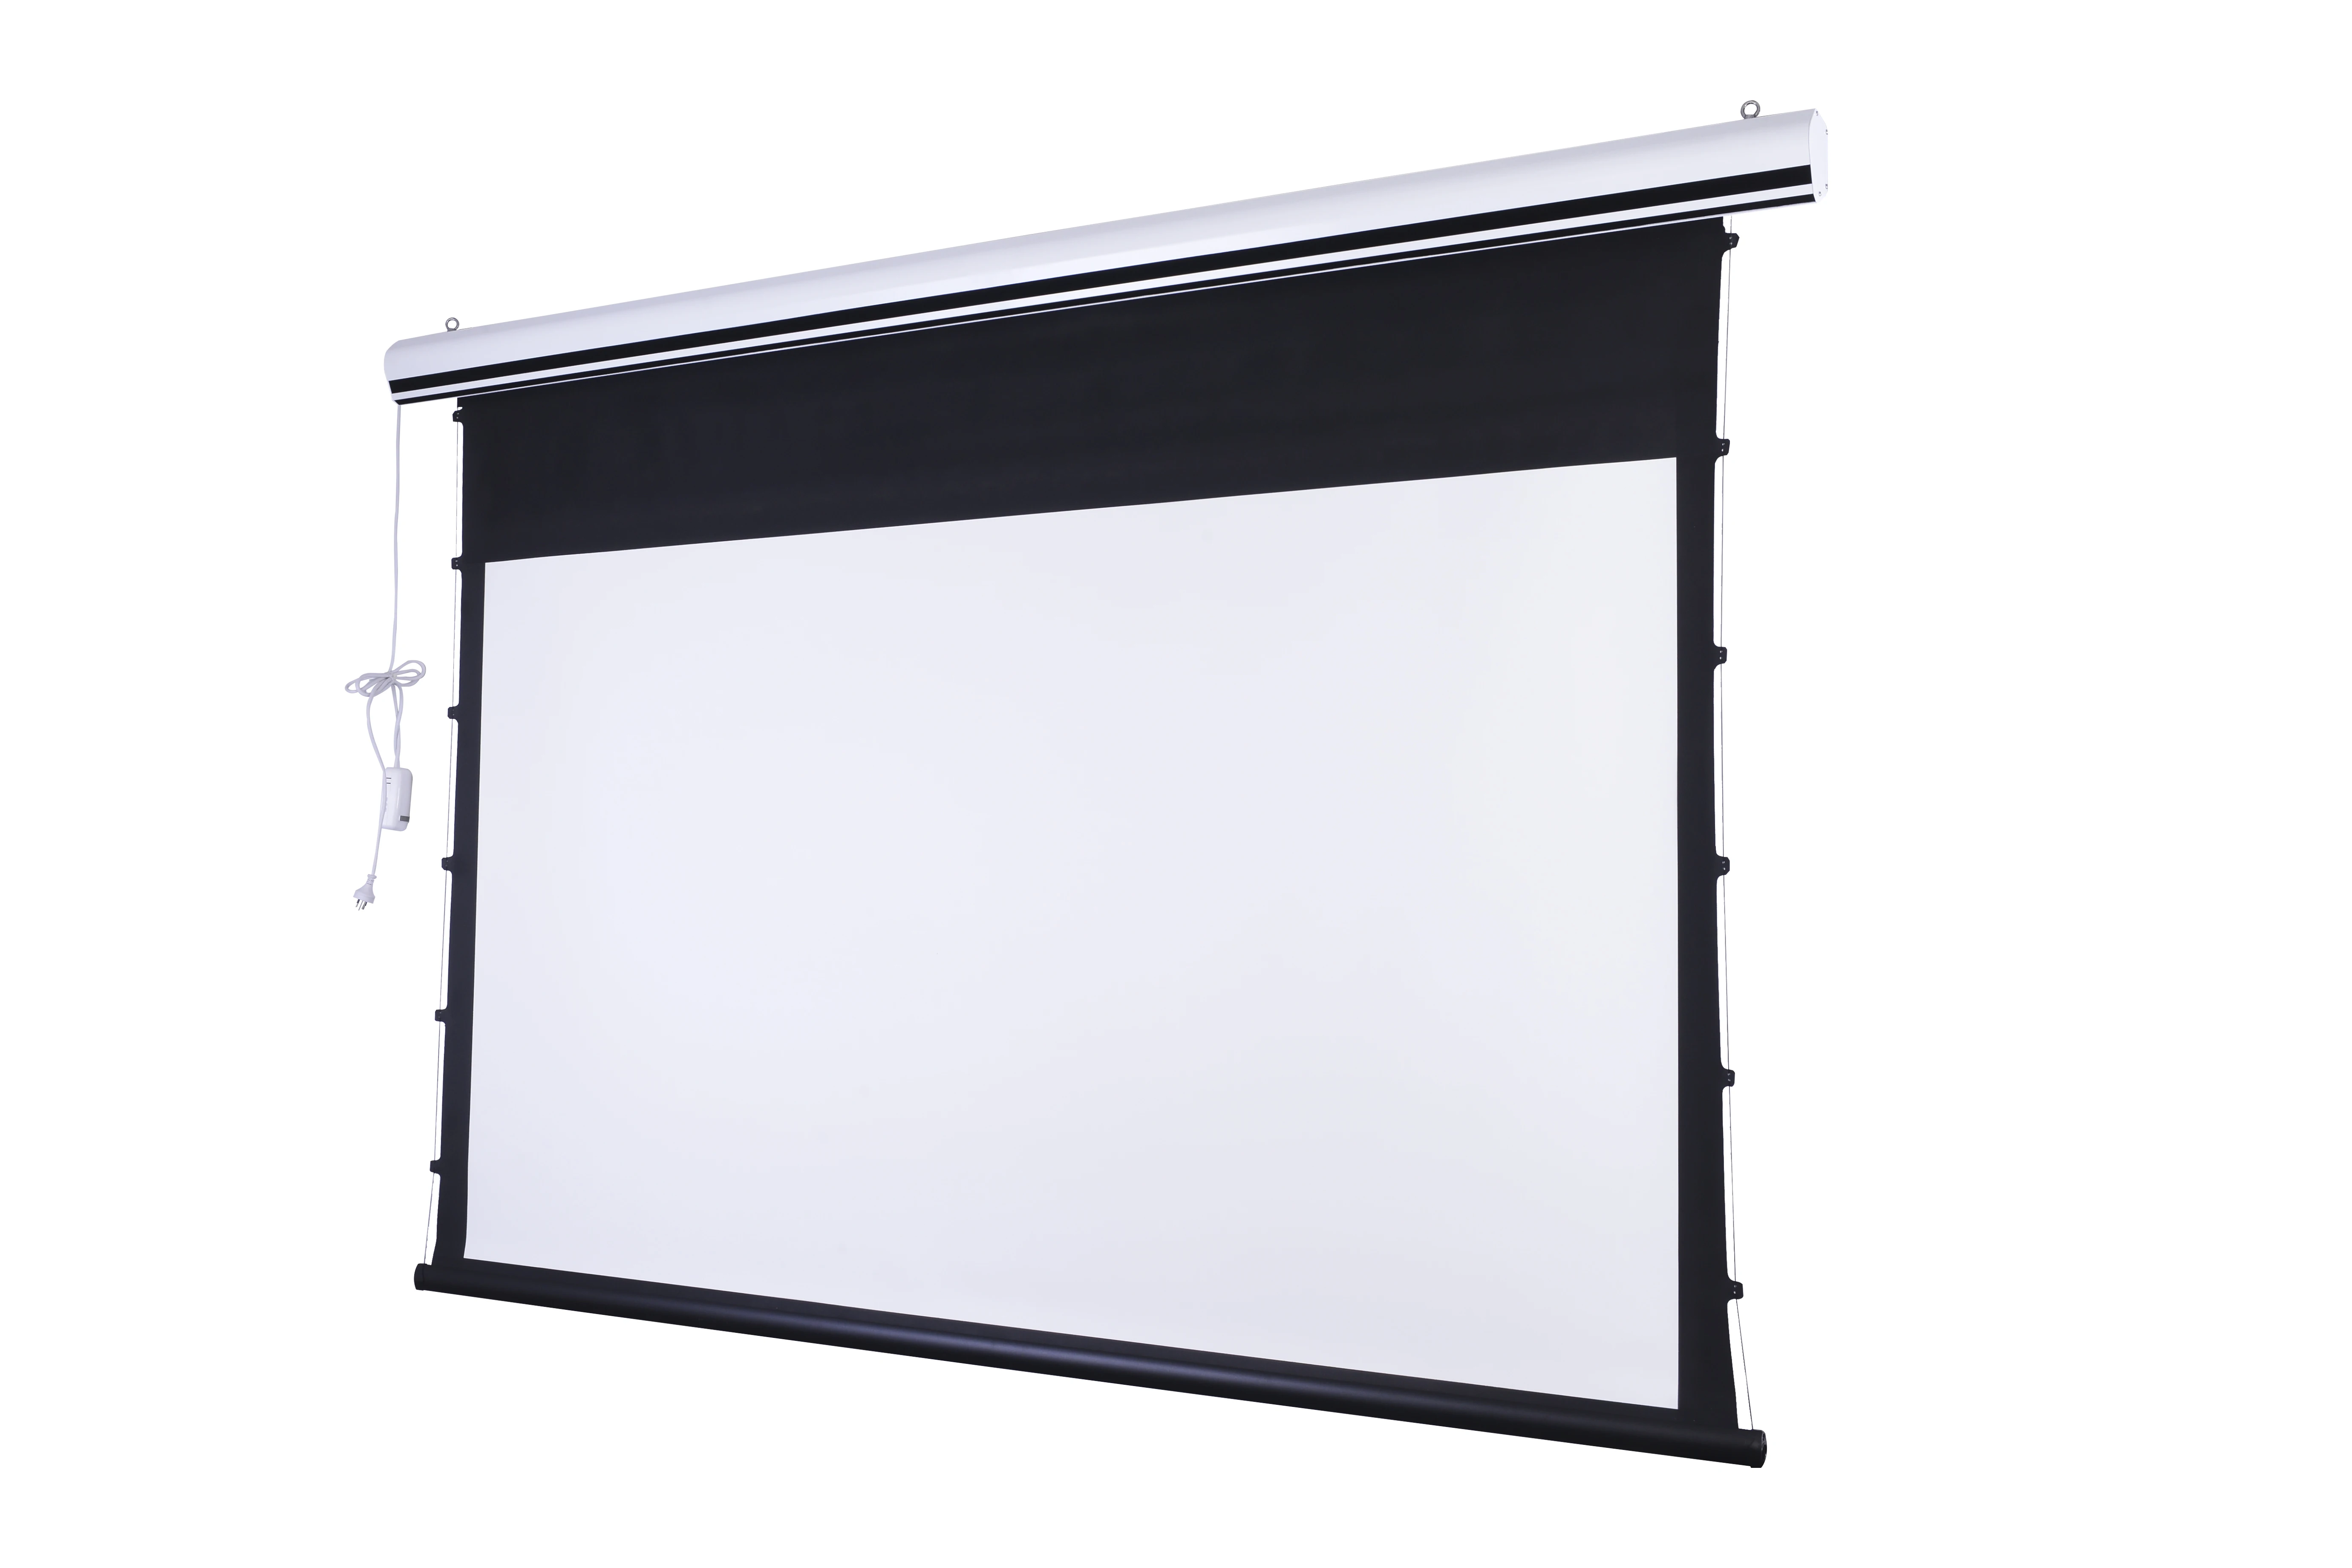 120 inch 16:9 Tab-tension Motorized projector Screen with remote control